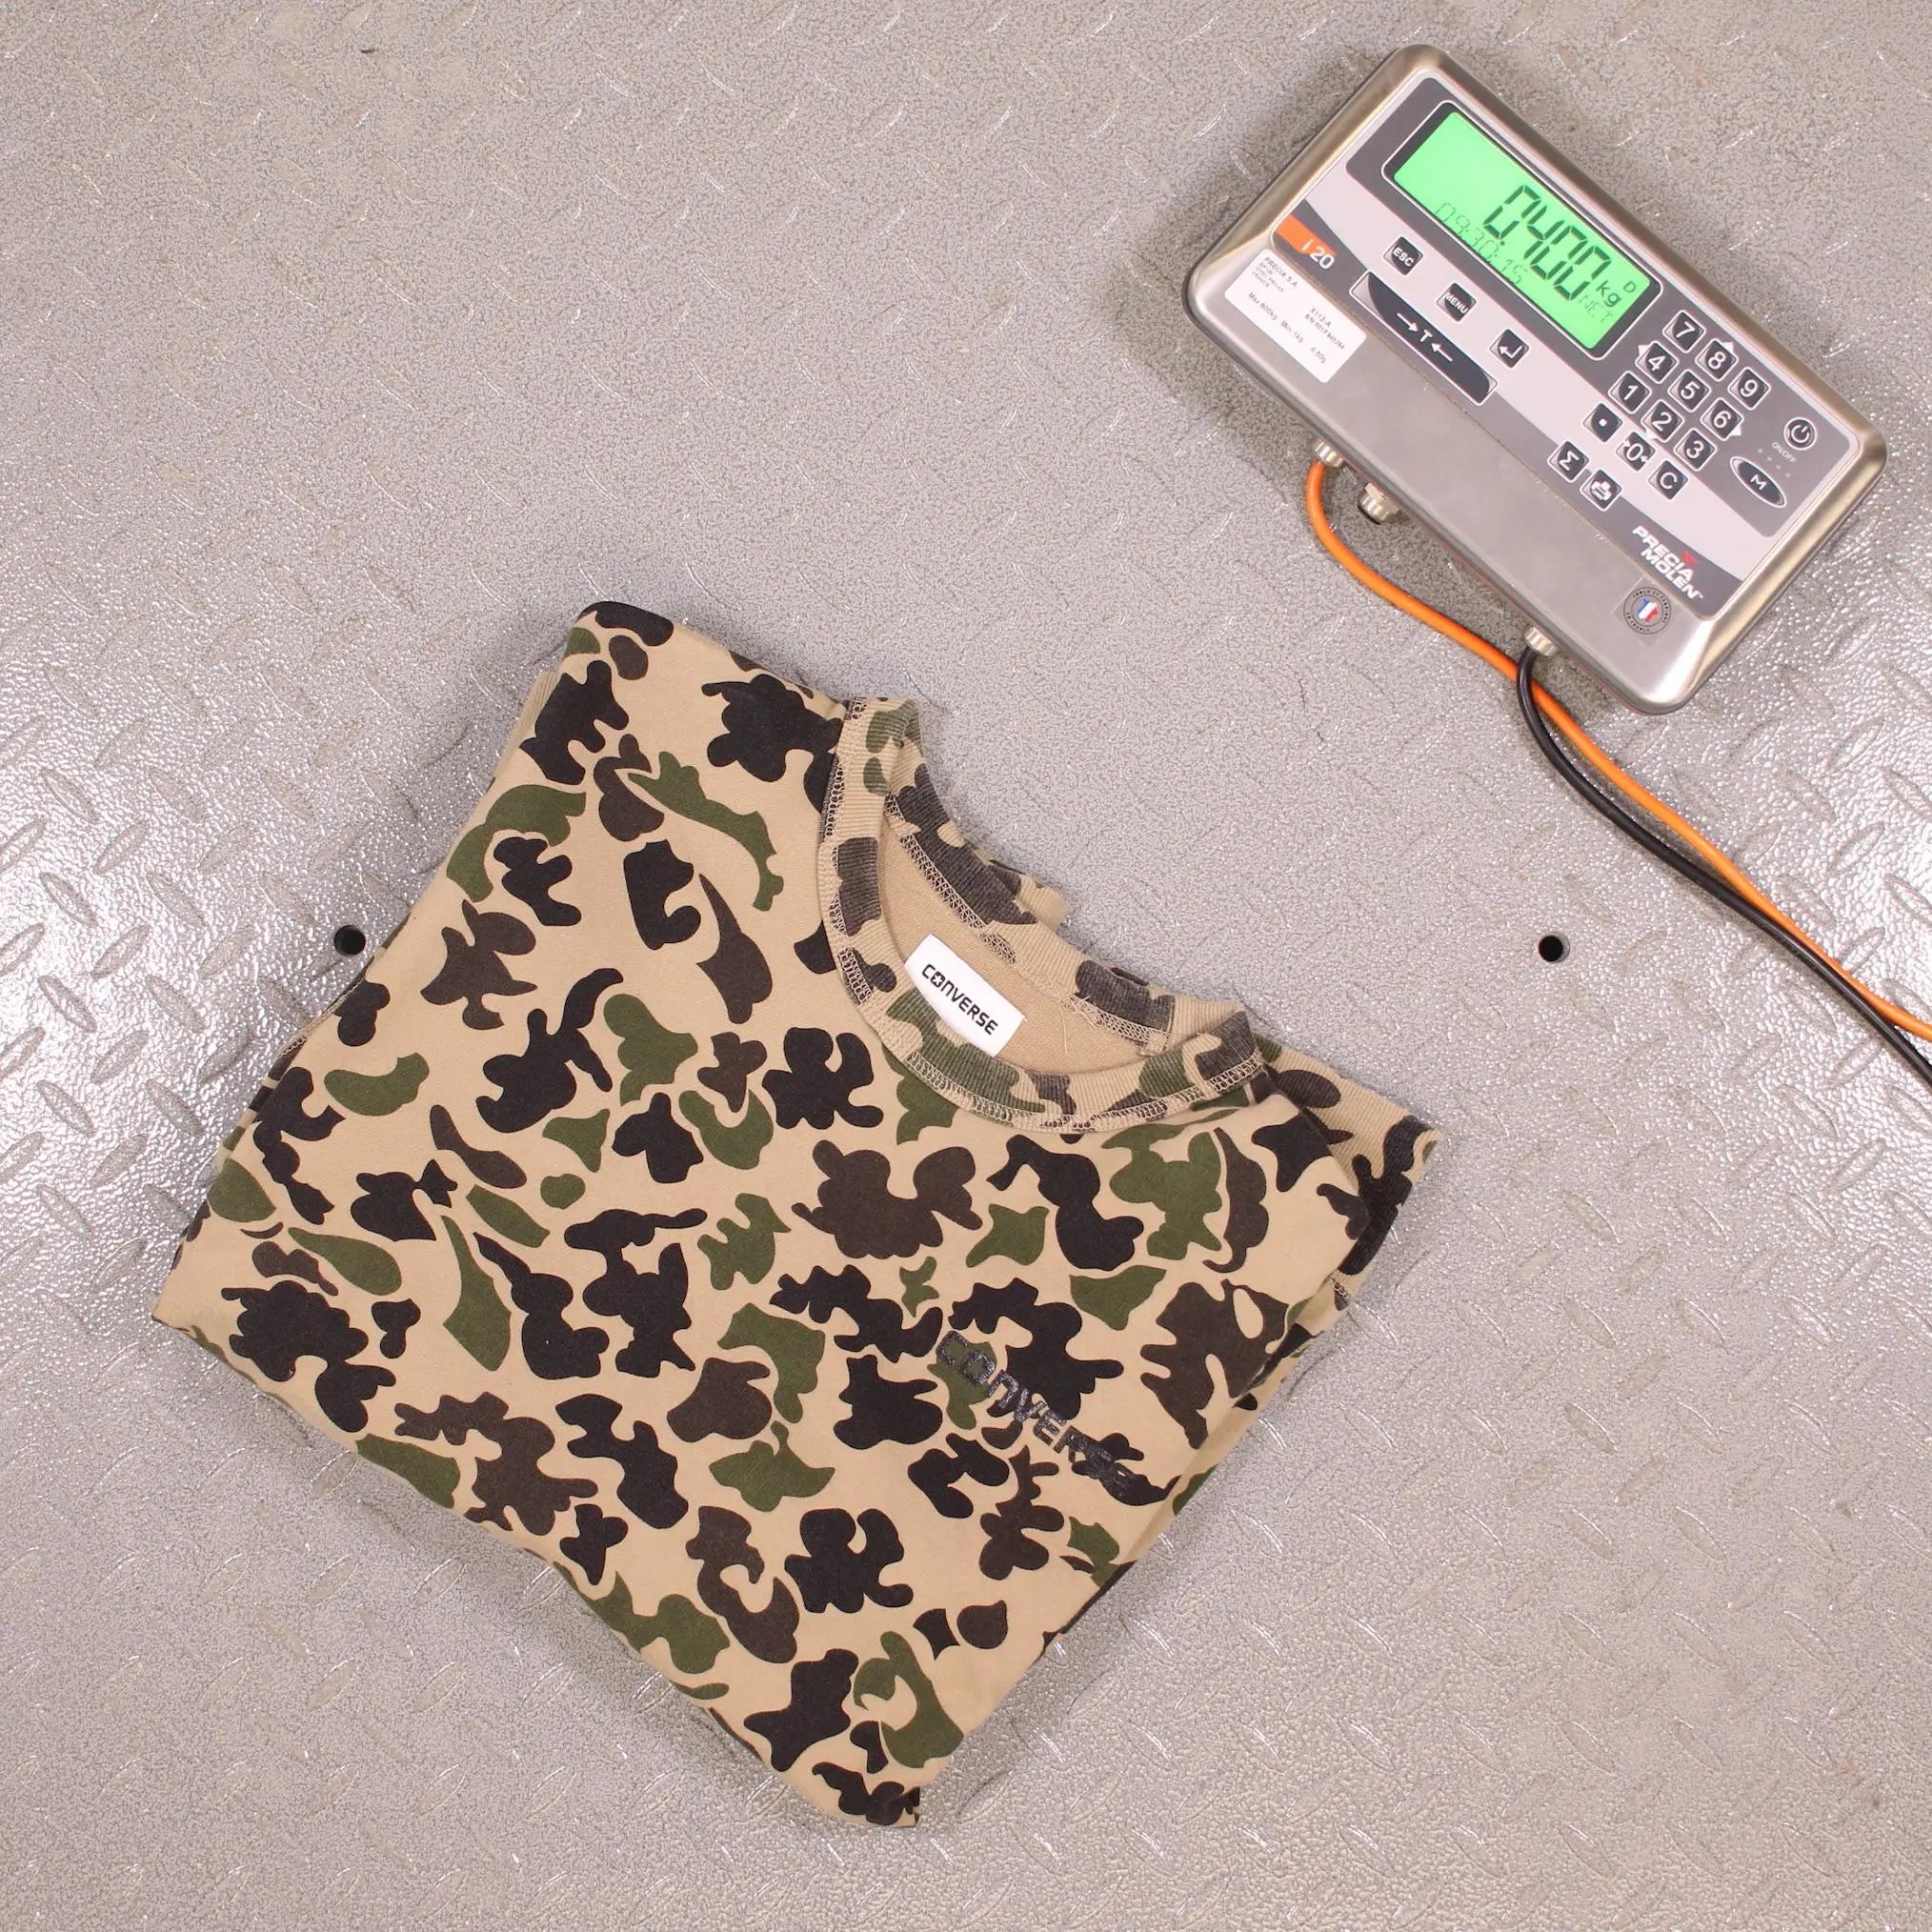 Converse - Camouflage Sweater by Converse- ThriftTale.com - Vintage and second handclothing